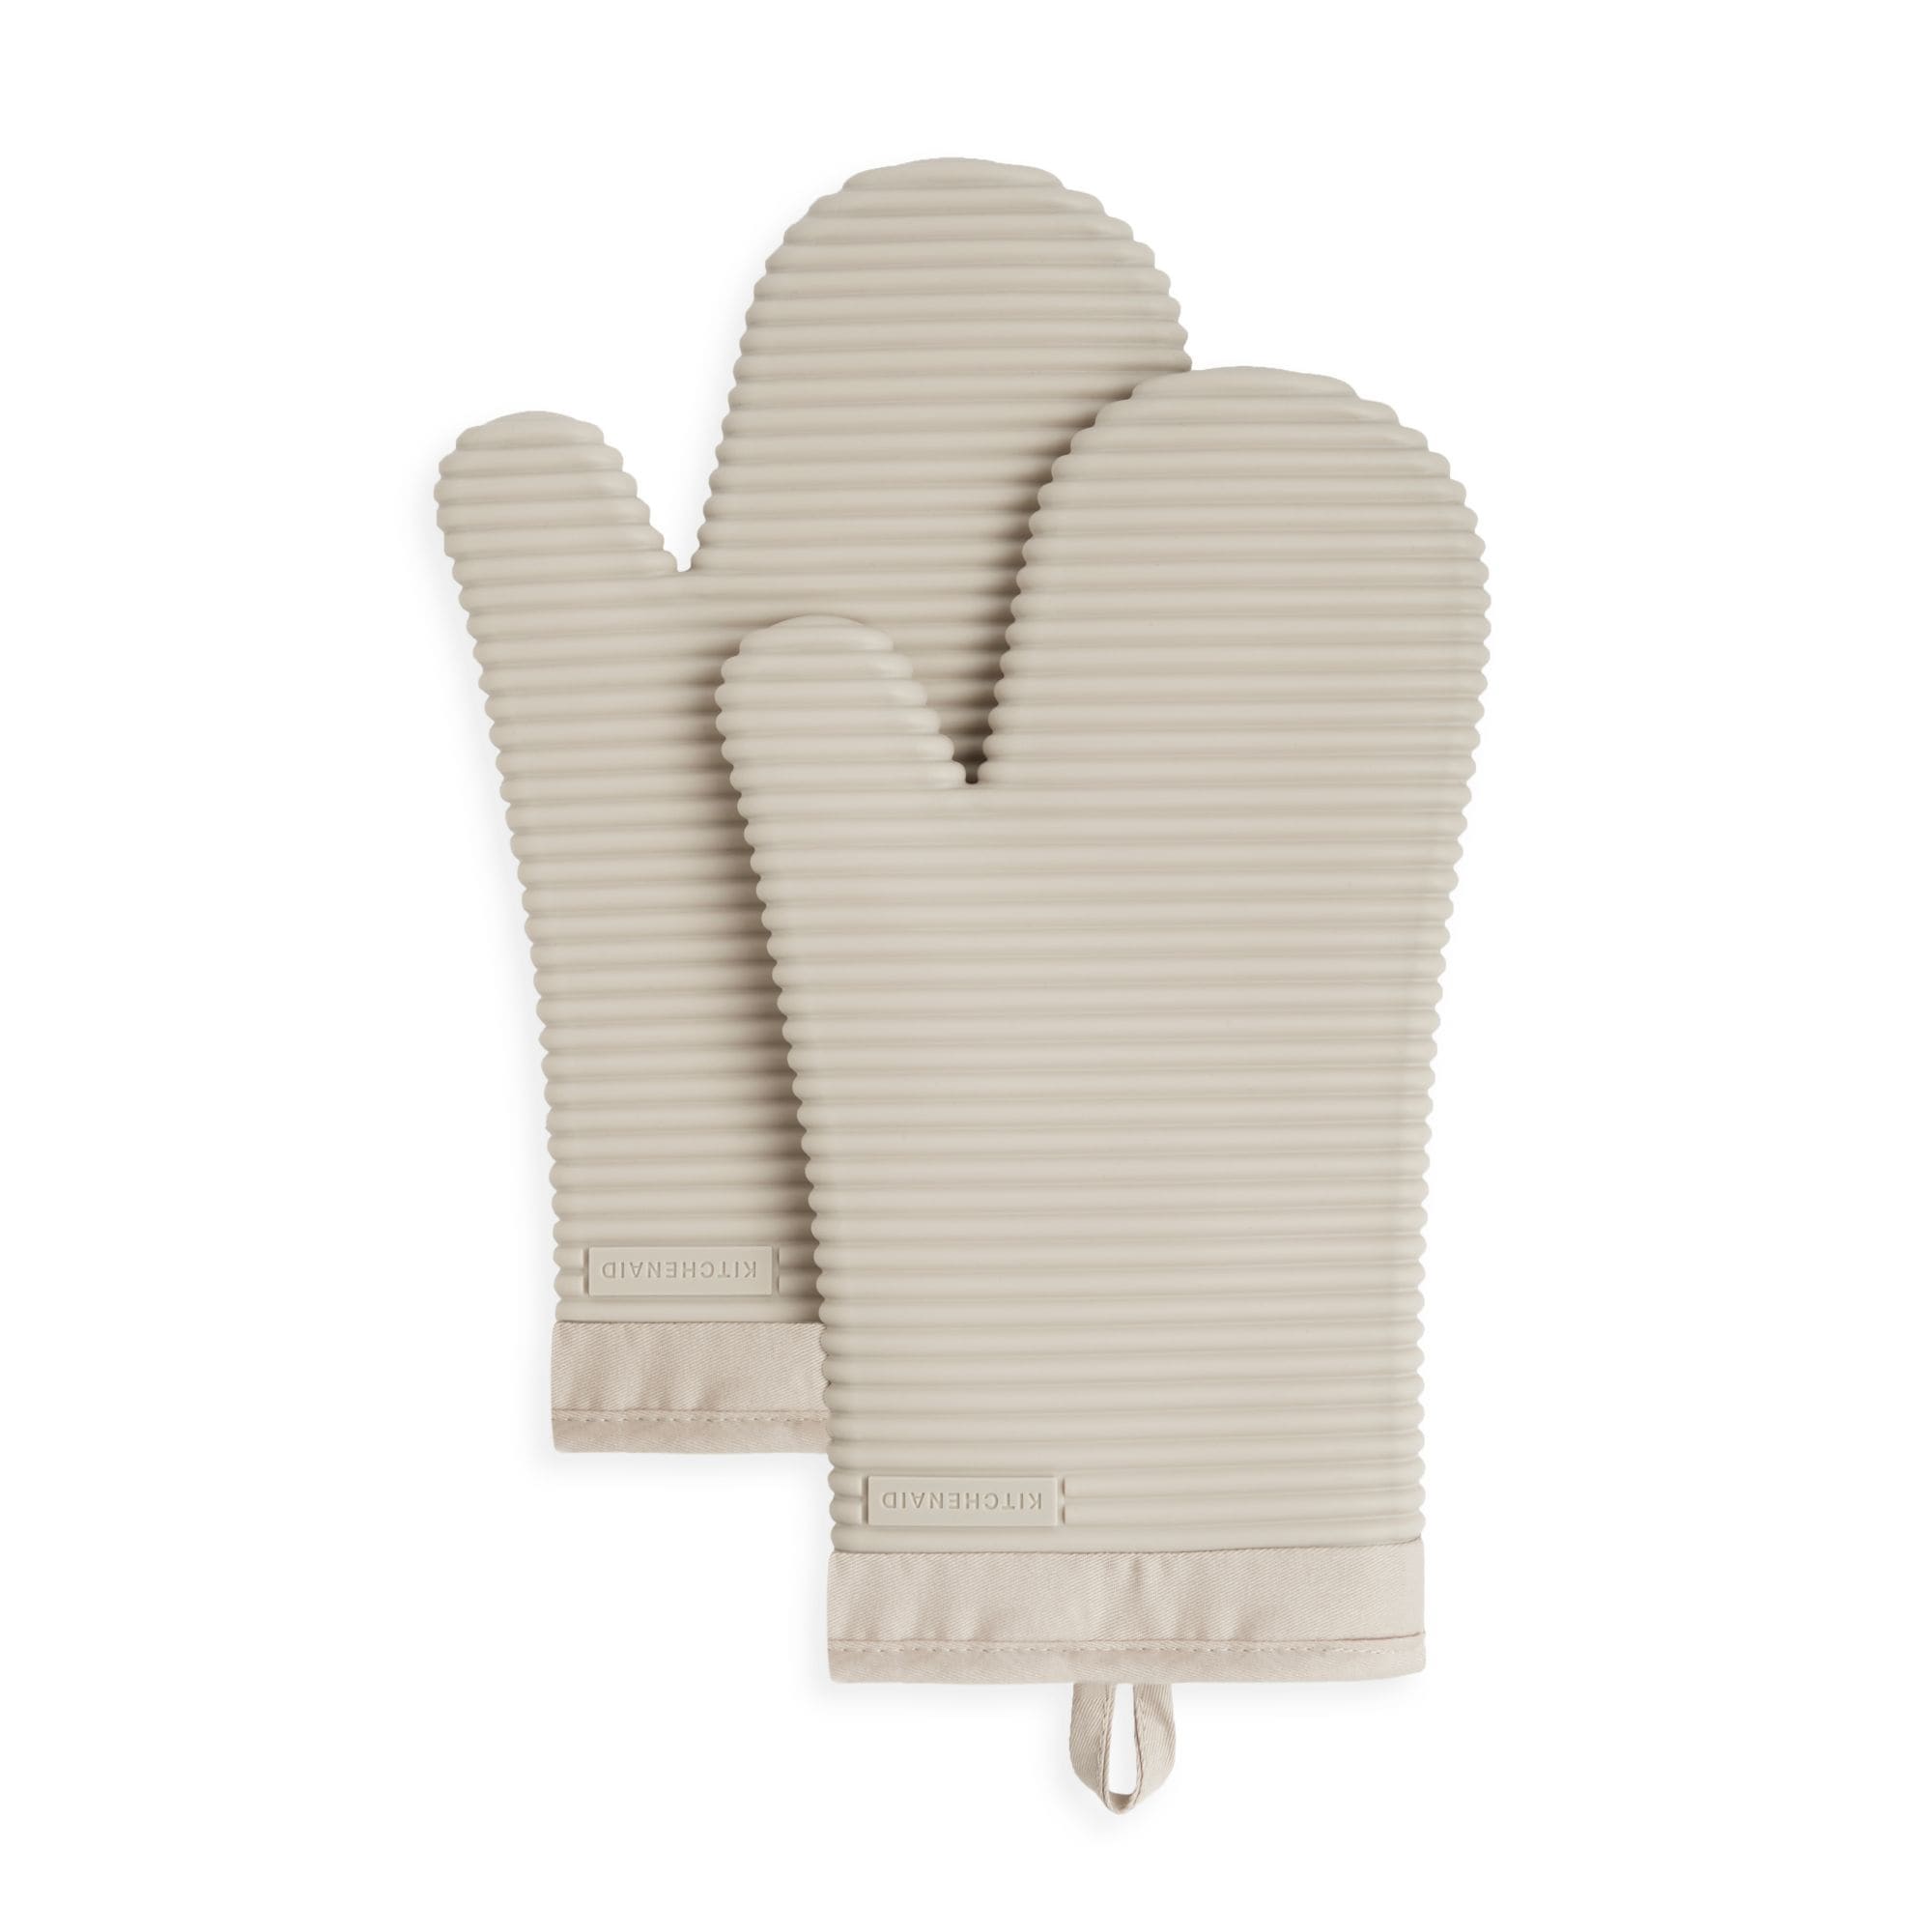 https://ak1.ostkcdn.com/images/products/is/images/direct/a51d59edec12f566224be04db99cc7f78ea62c8f/KitchenAid-Ribbed-Soft-Silicone-Oven-Mitt-Set%2C-Set-of-2.jpg